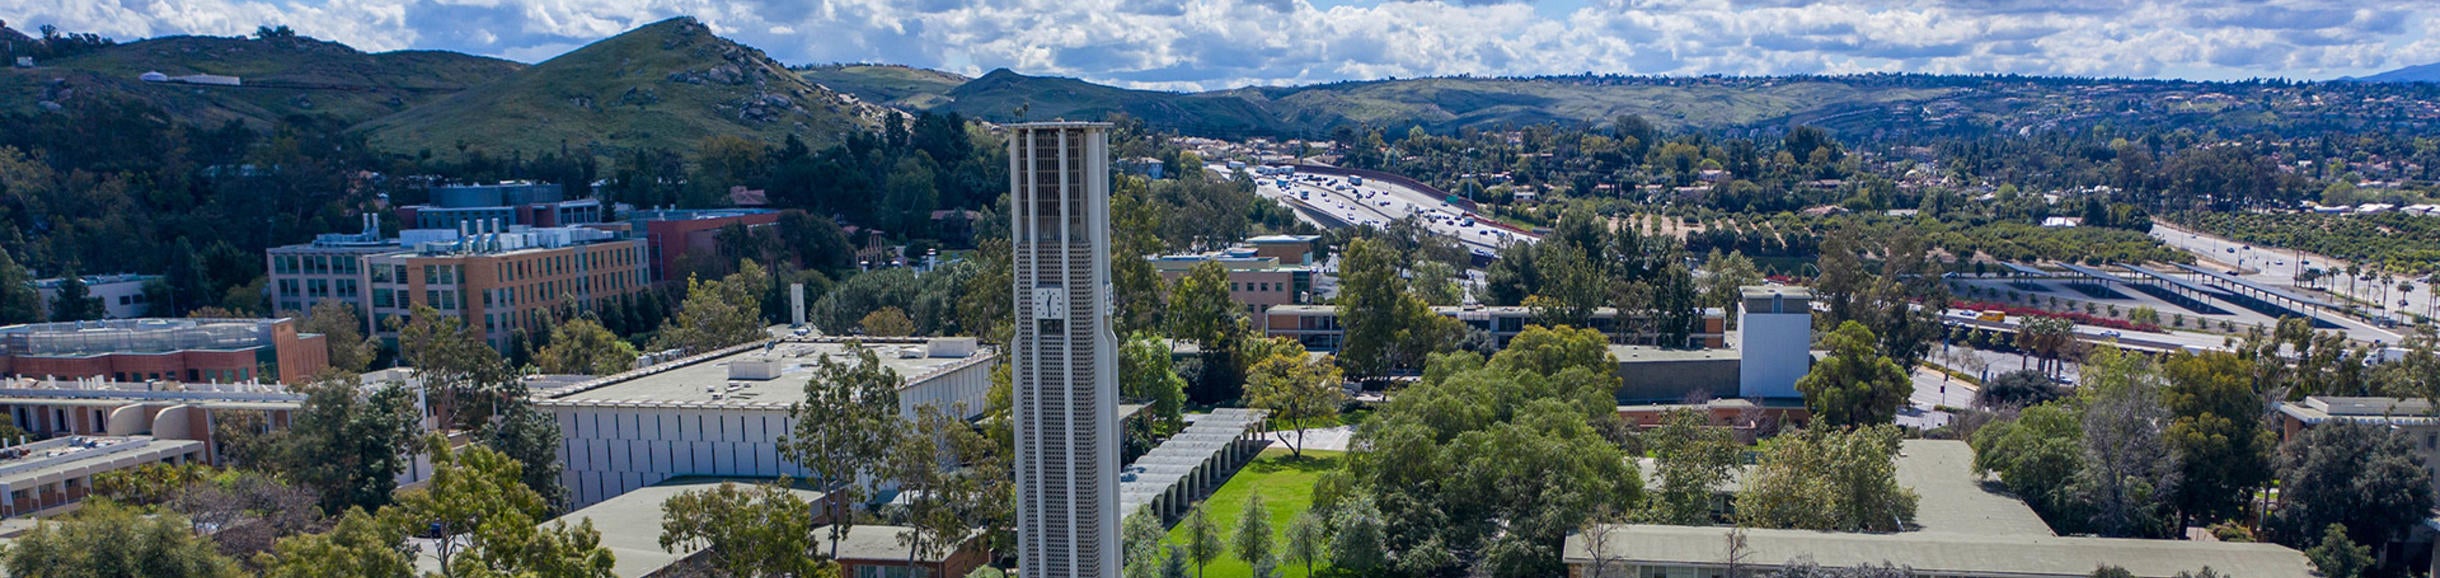 UCR March 2020 Drone Image